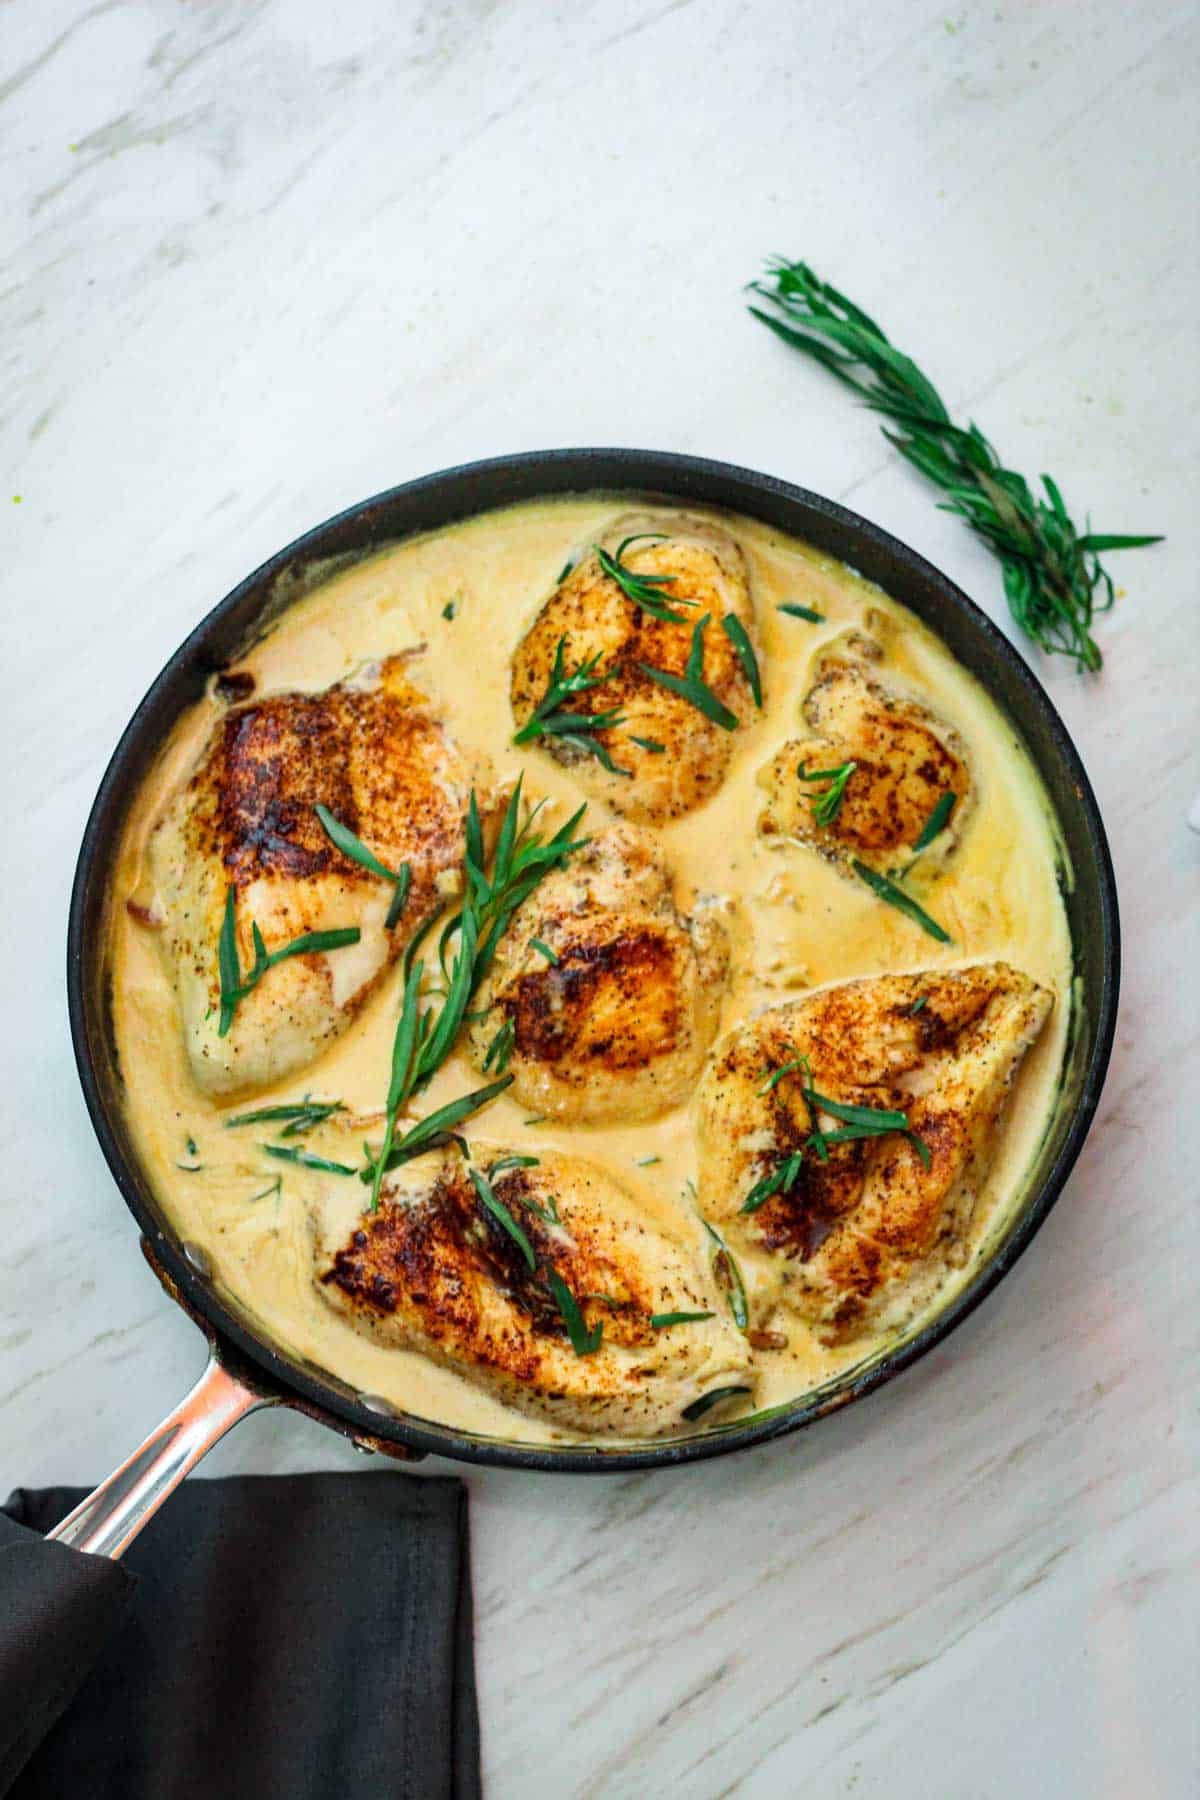 Skillet chicken with tarragon in a white wine sauce and dijon mustard. There's tarragon garnishes over the chicken and around the skillet.